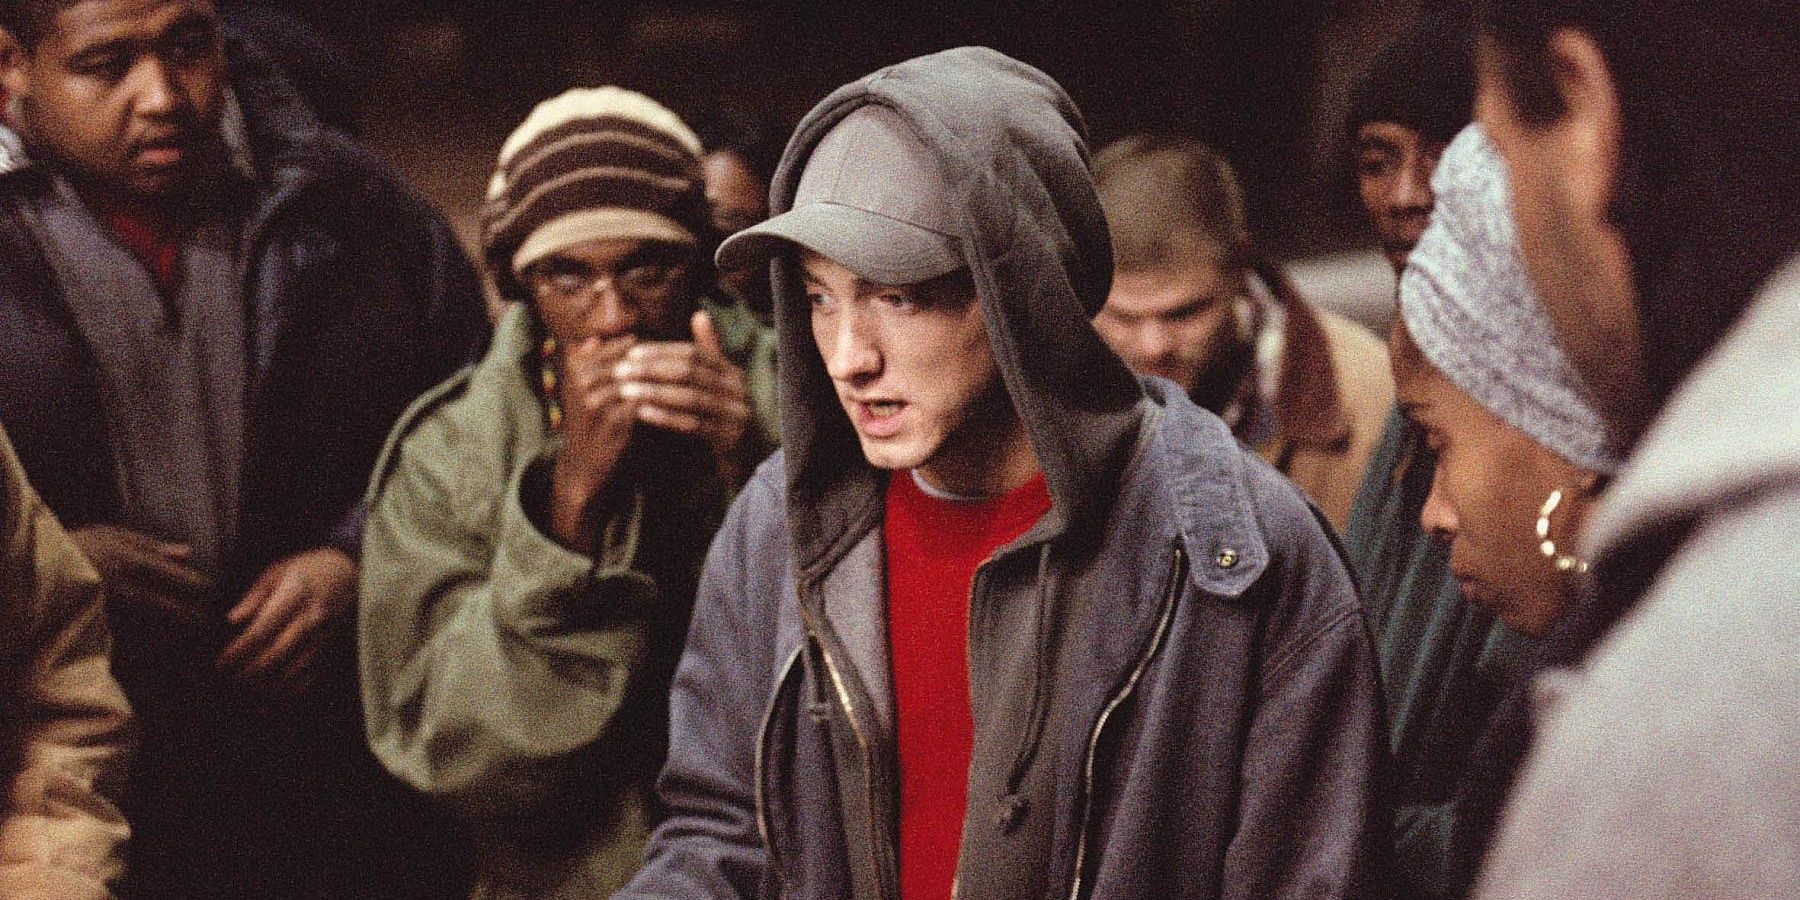 Eminem Marshall Bruce Mathers rapping in 8 Mile with a group of people.